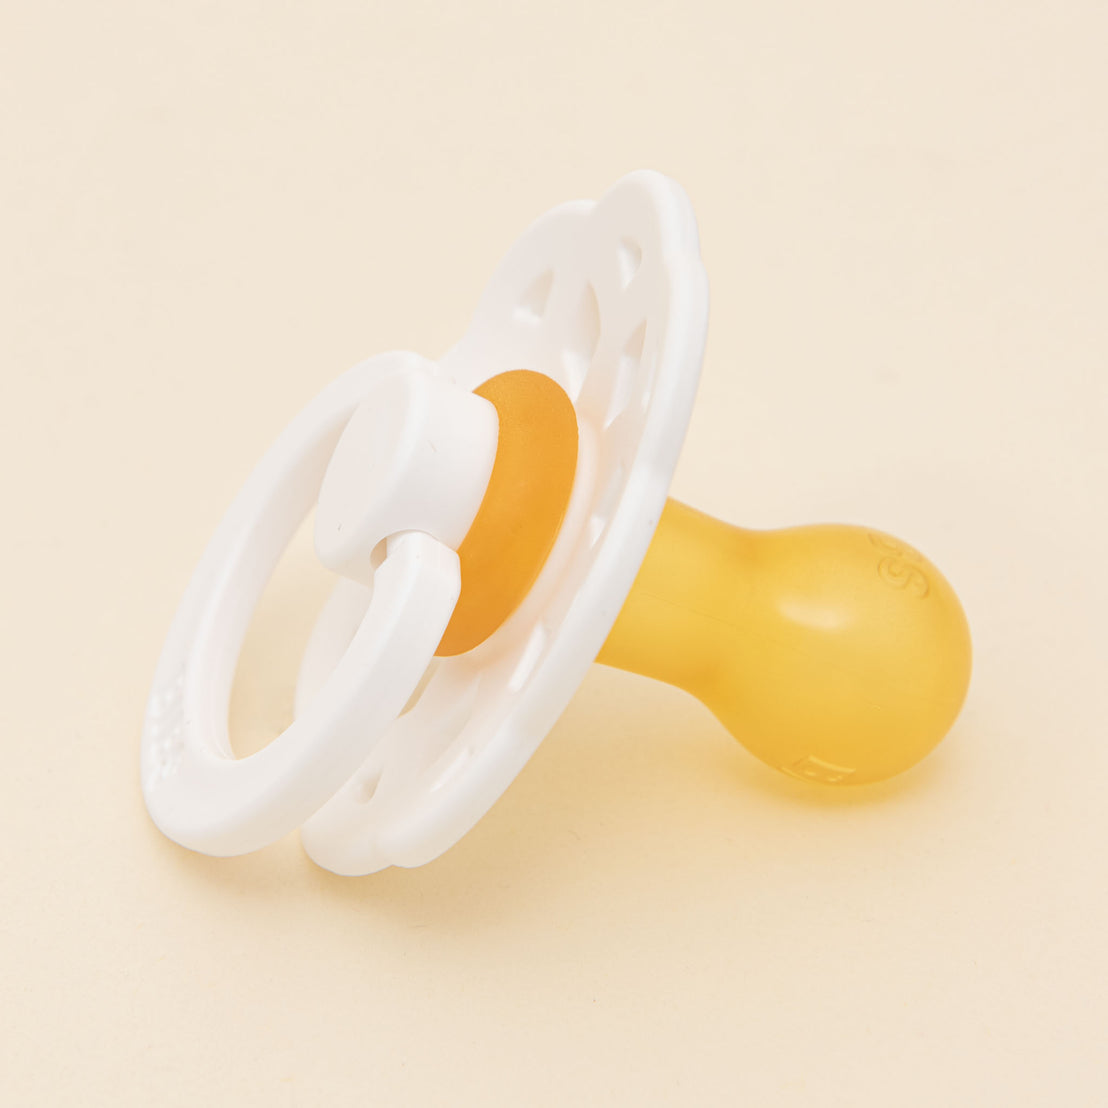 A Bibs Lace Pacifier in White with a white and transparent shield and handle, and a yellow nipple, set against a light beige background.